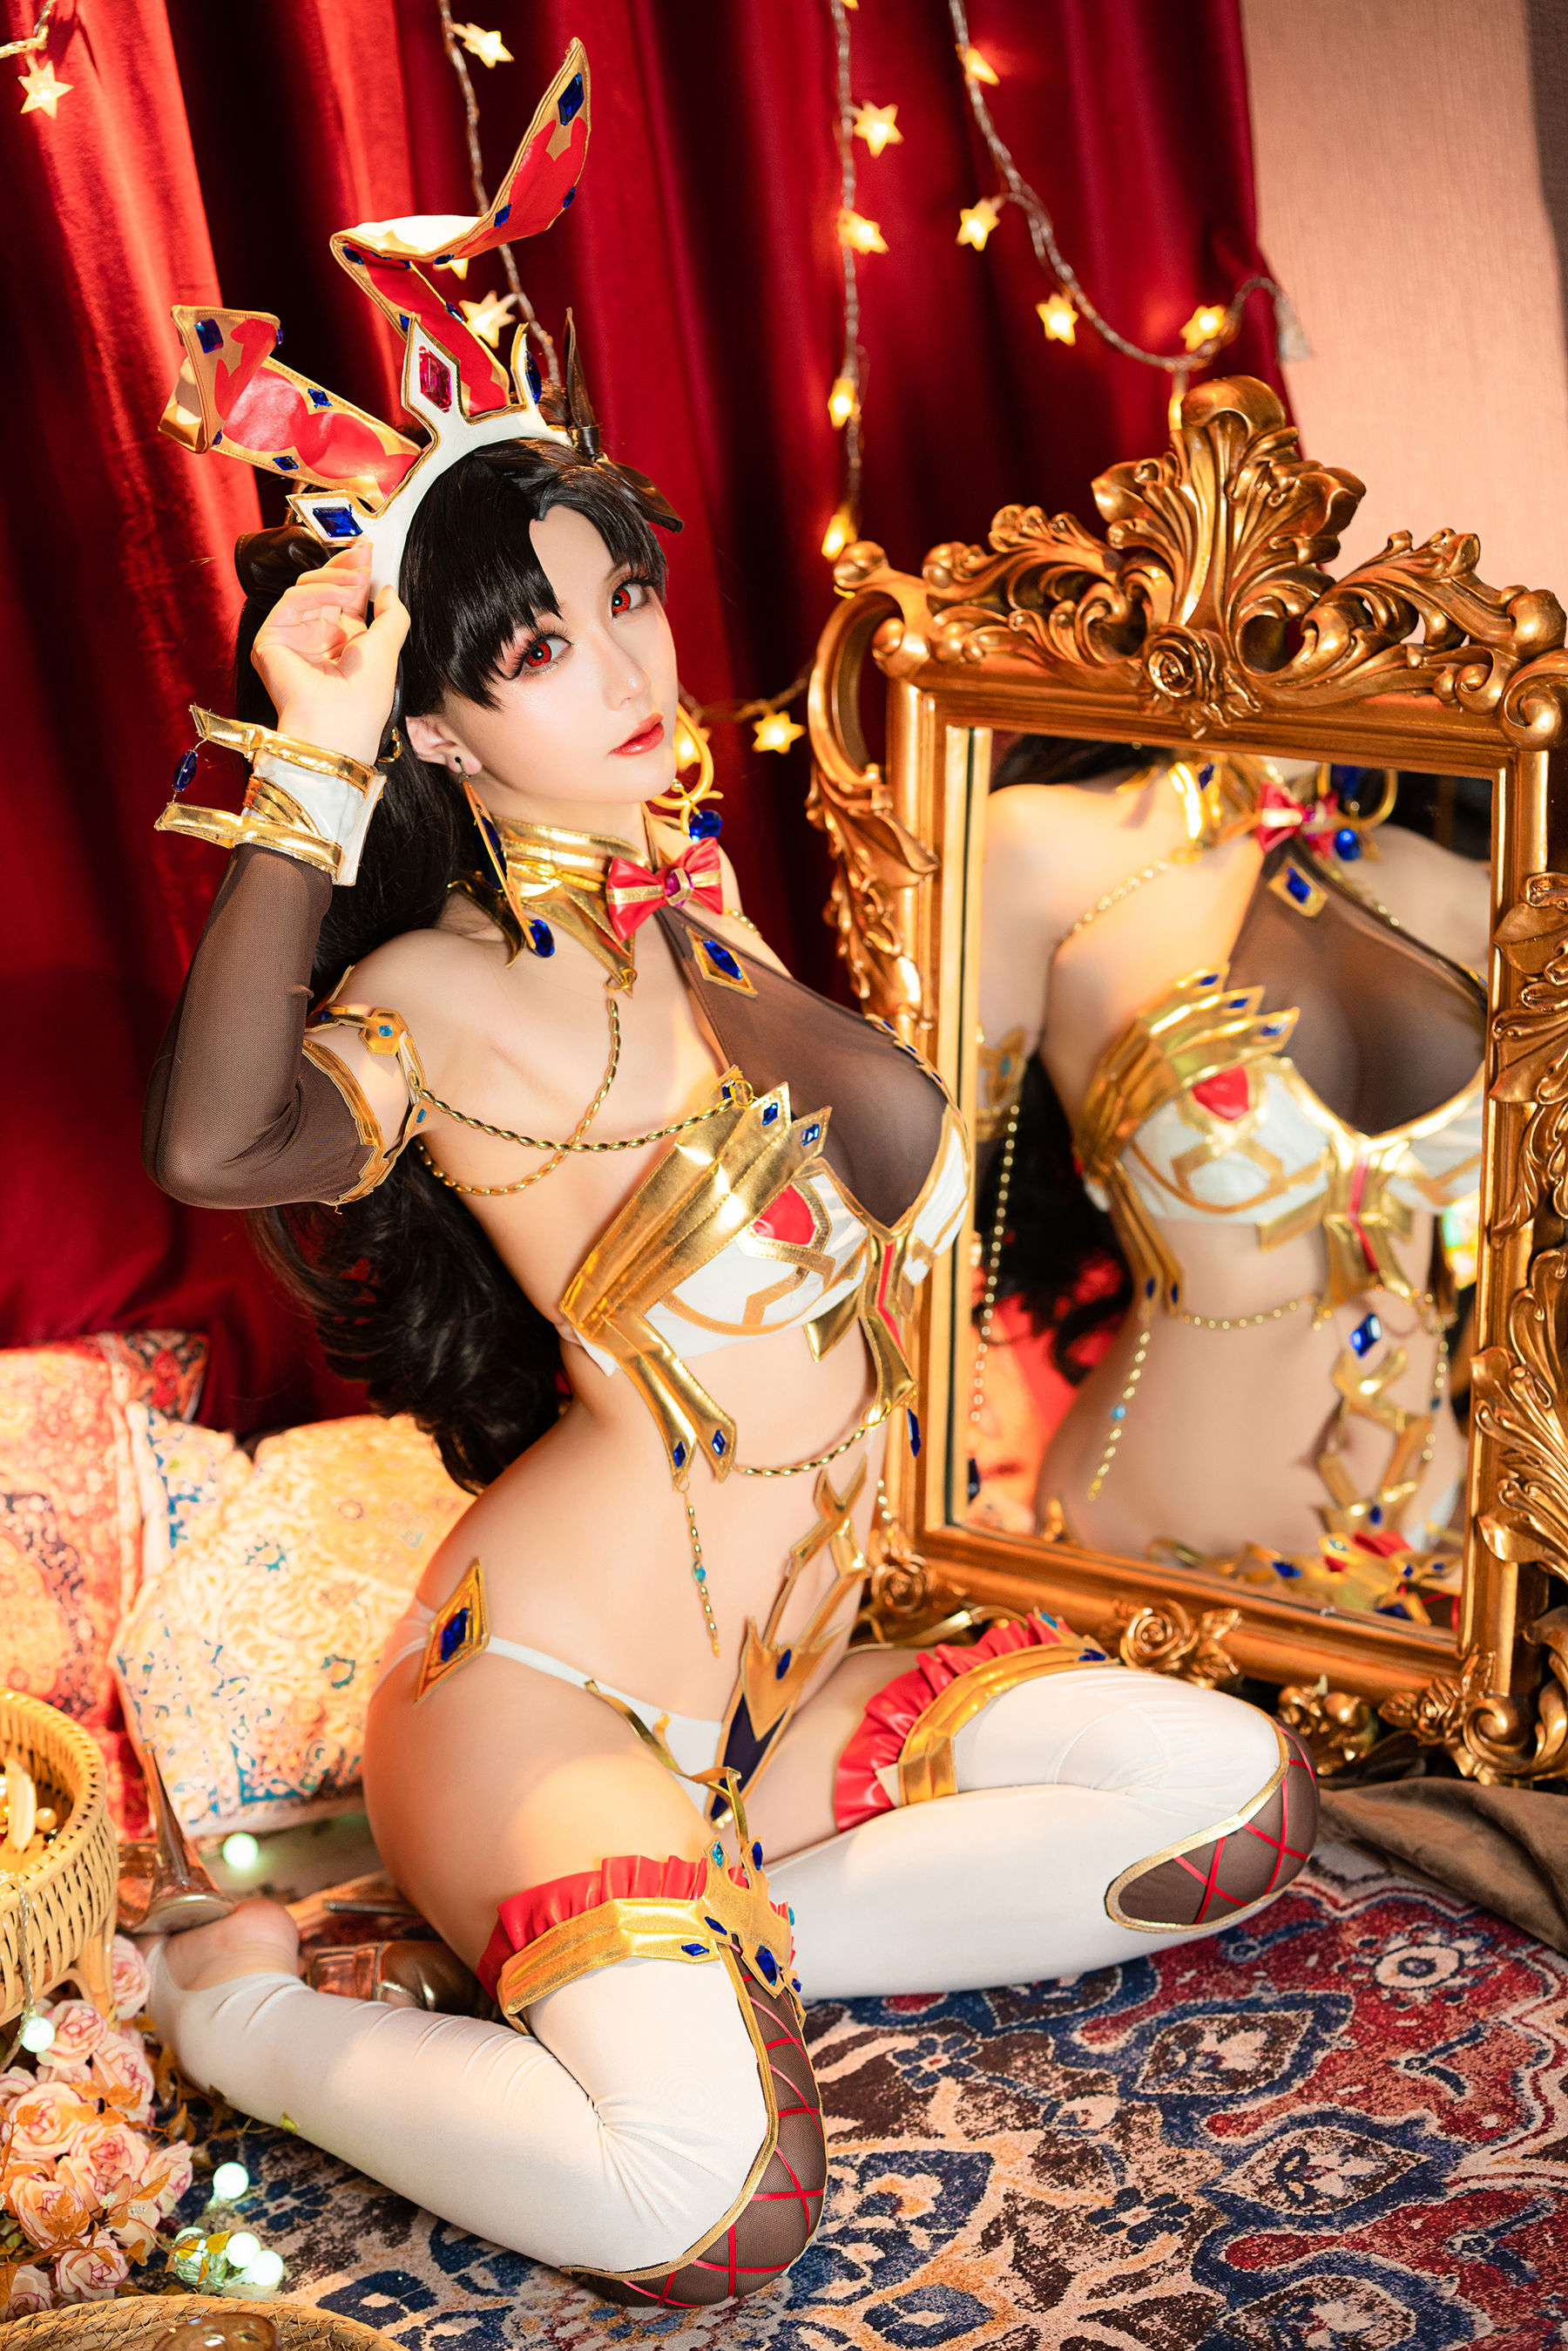 [Net Red COSER Photo] Miss Coser Star Chichi - Ishtar Colleague Istarin Page 58 No.b7b721